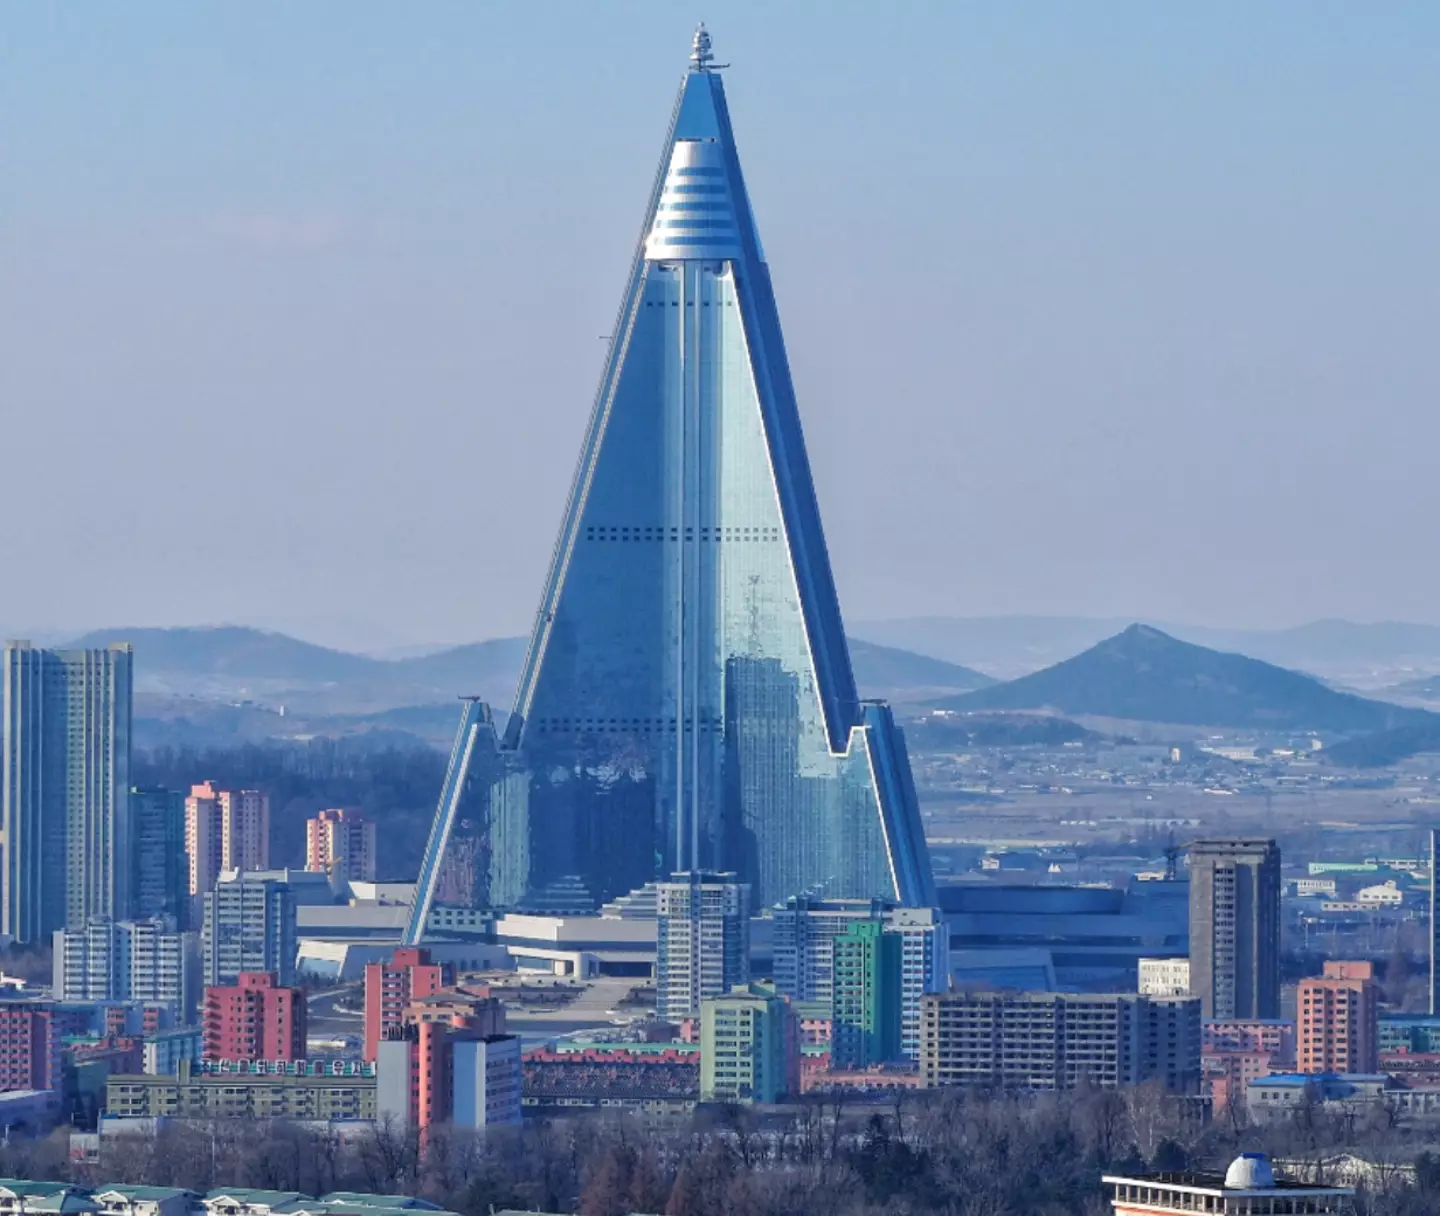 Construction started on the Ryugyong Hotel in the 1980s.